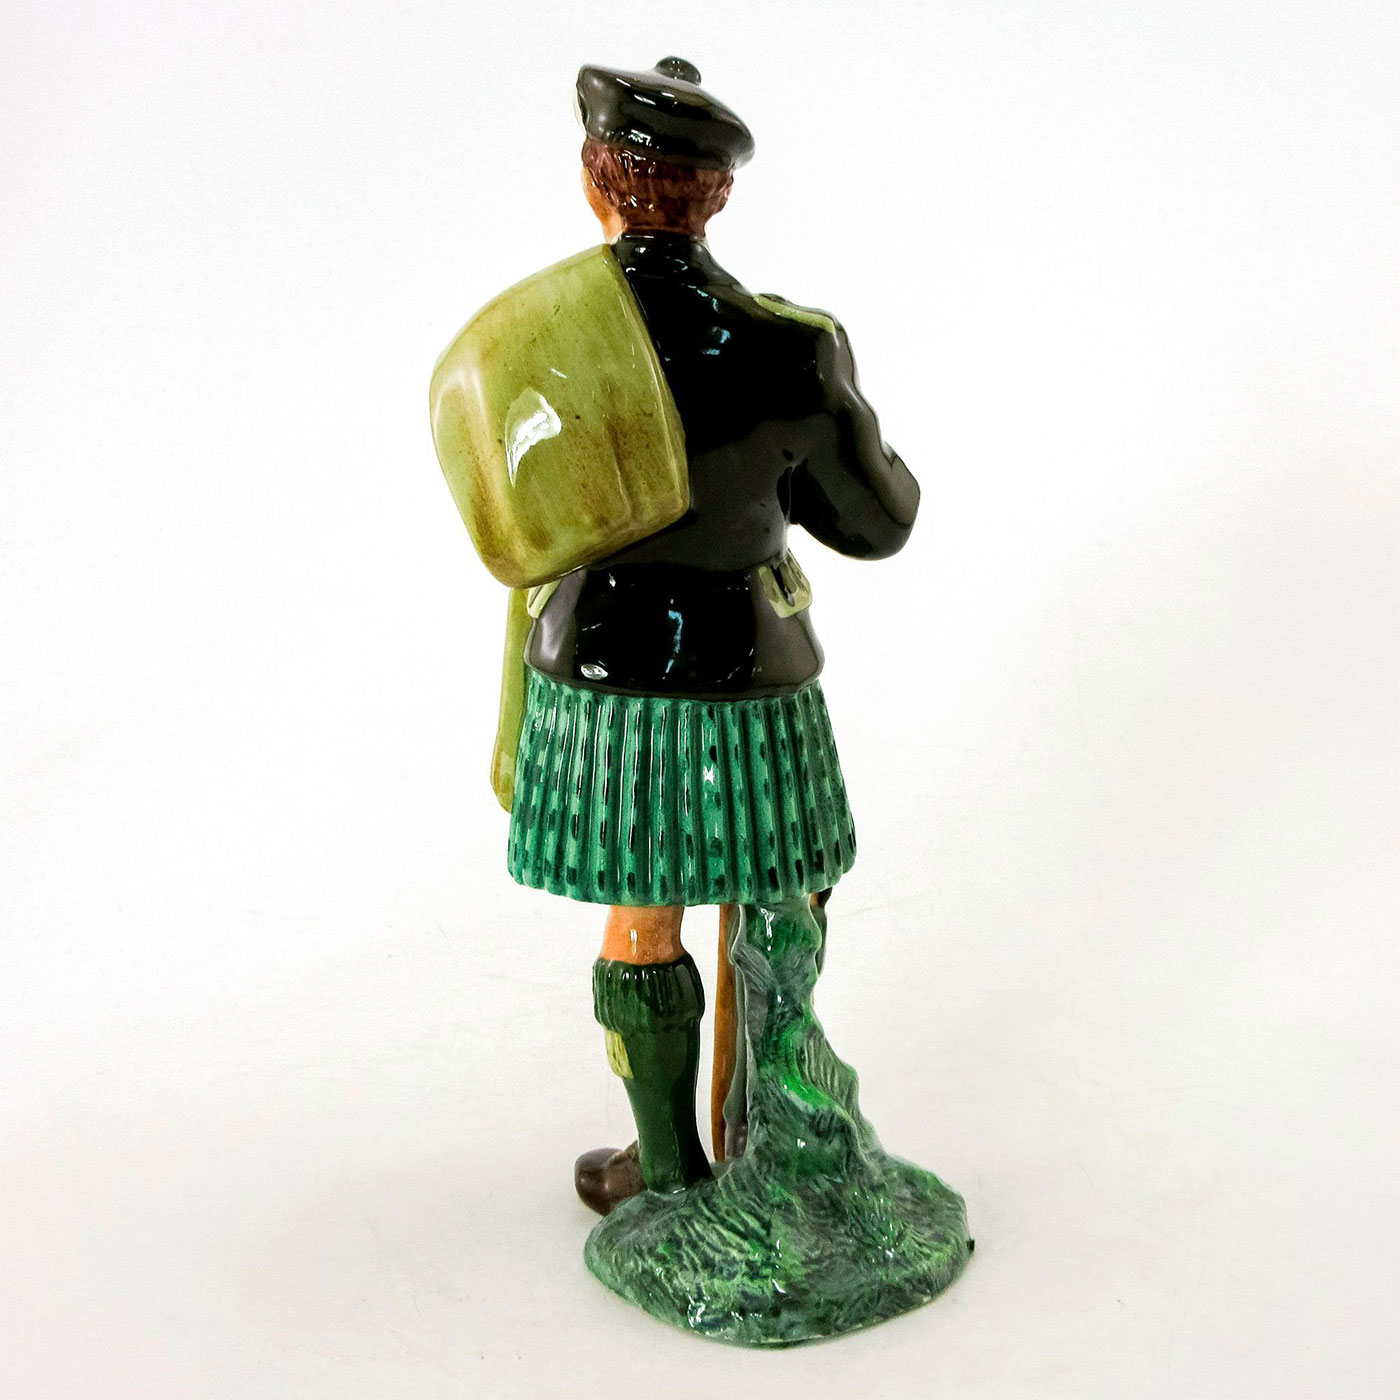 Laird HN2361 - Royal Doulton Figurine - Image 2 of 3